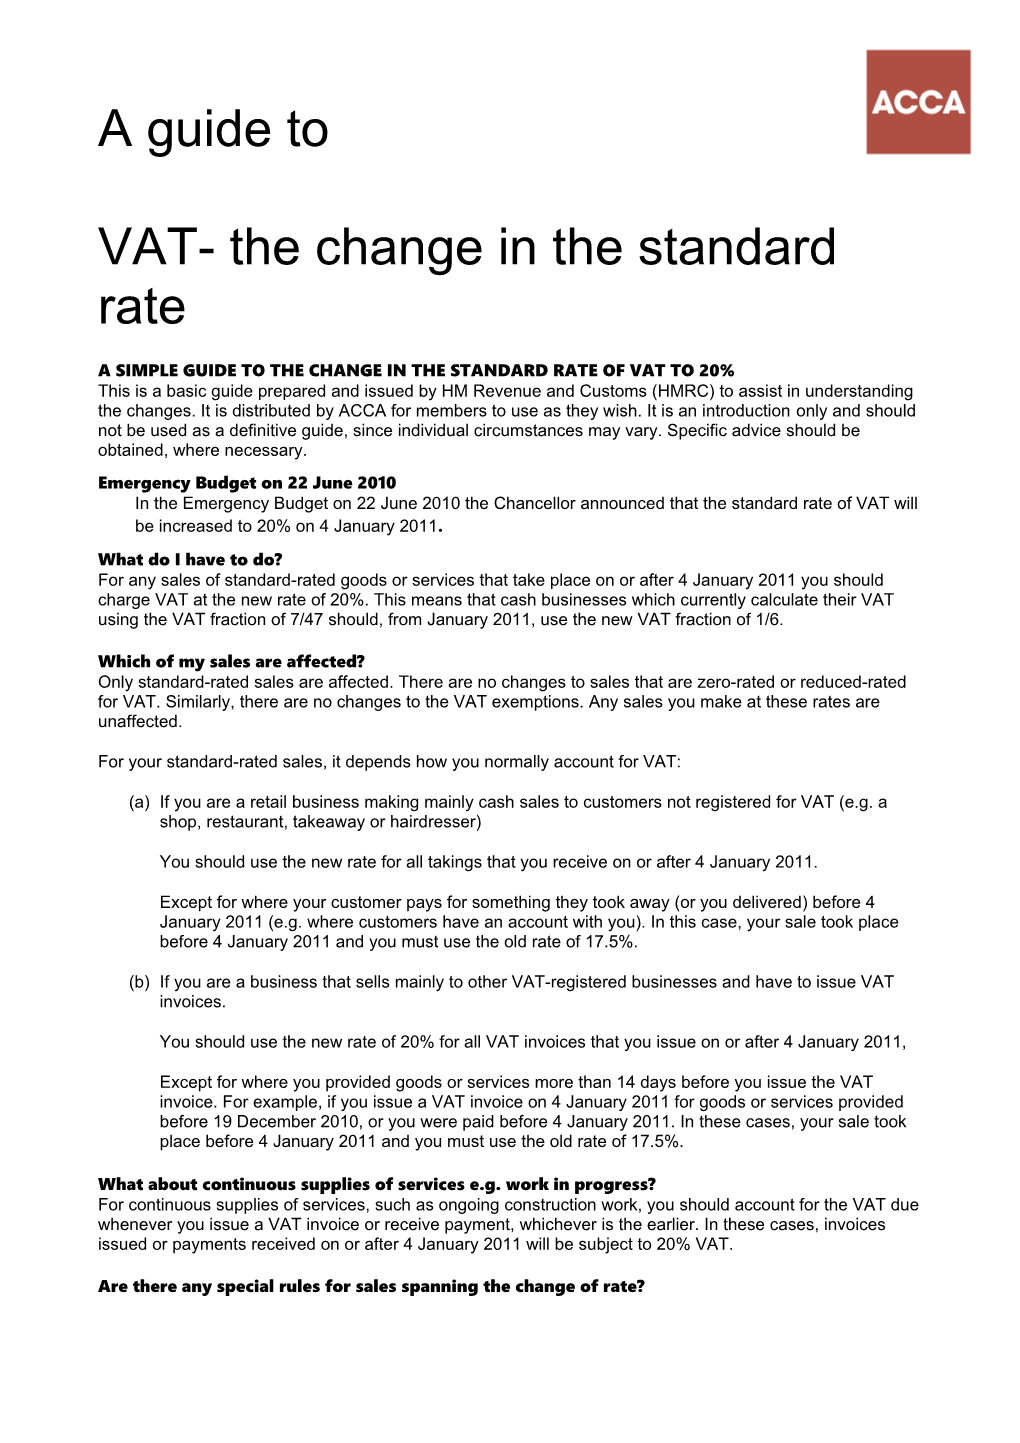 A Simple Guide to the Change in the Standard Rate of Vat to 20%